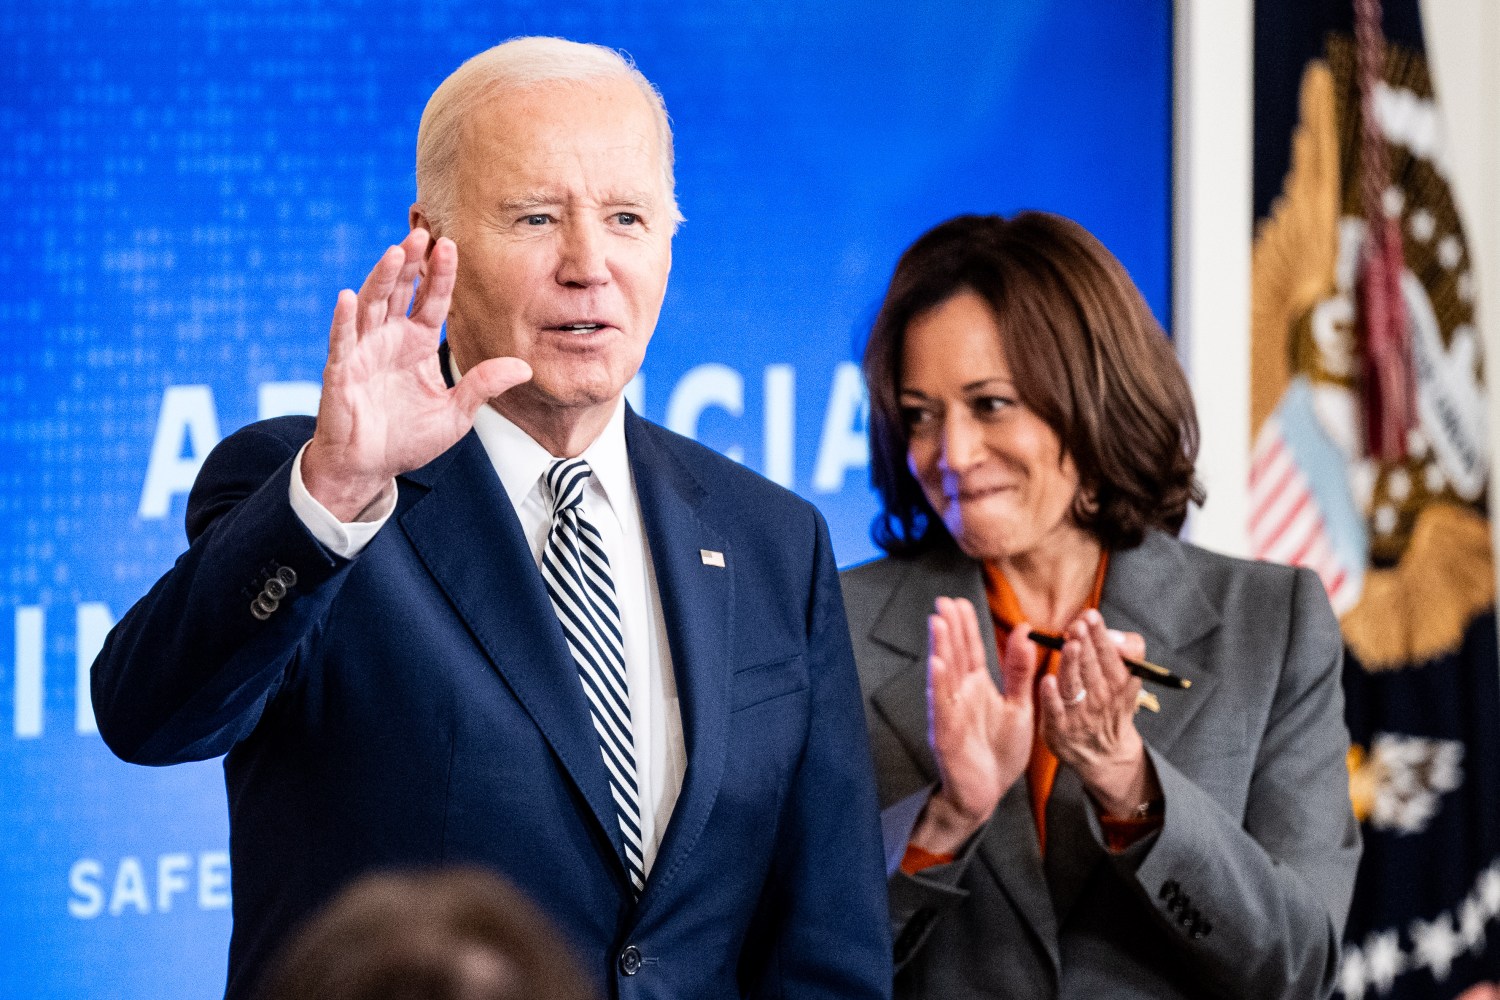 President Joe Biden and Vice President Kamala Harris at an event where the president signed an Executive Order regarding Artificial Intelligence (AI) at the White House in Washington, DC. (Photo by Michael Brochstein/Sipa USA/REUTERS)